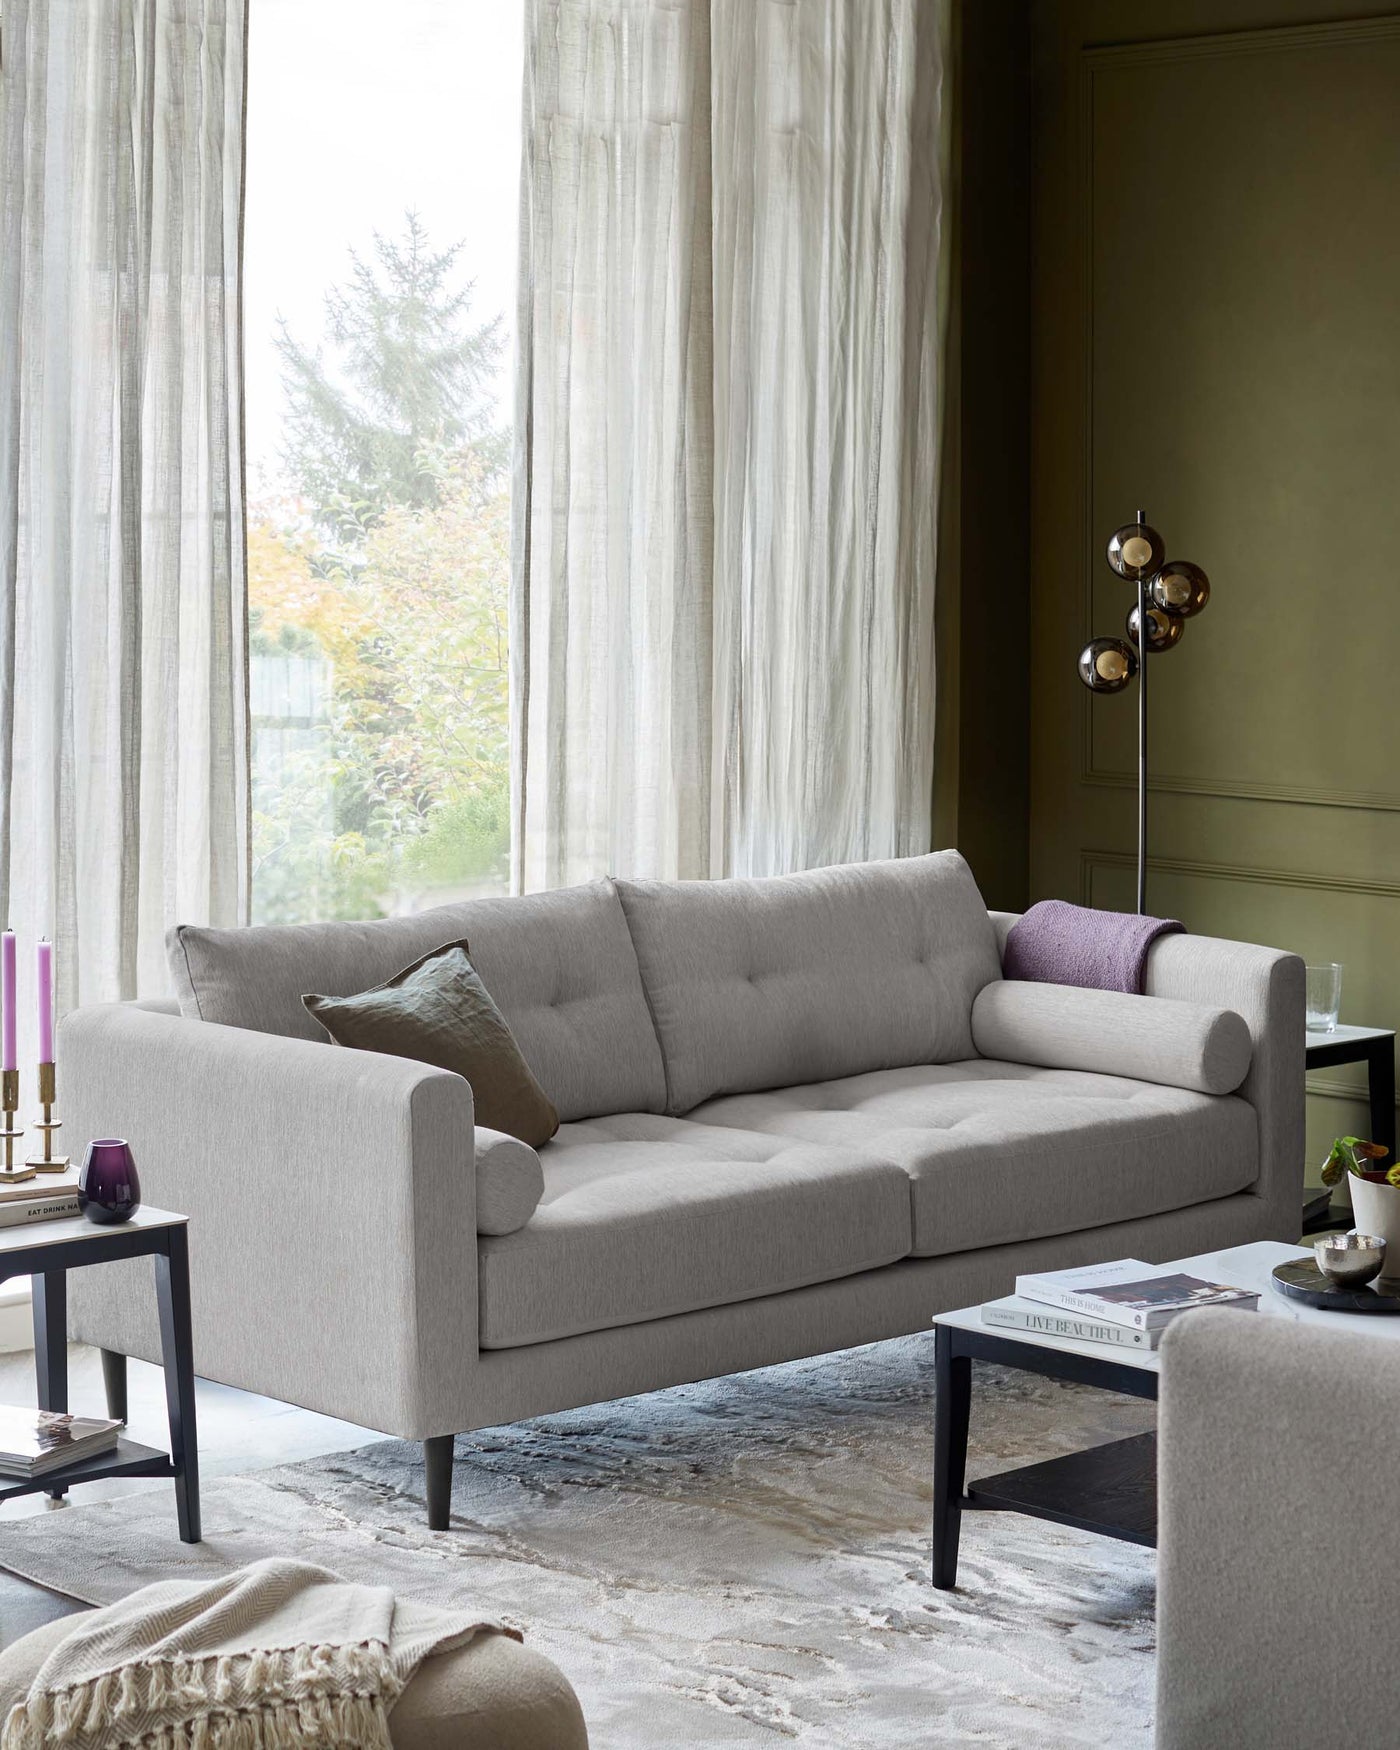 Elegant three-seater sofa in a light grey fabric with minimalist design, featuring clean lines and plush cushions. Accompanied by a sleek, black side table with a thin metal frame and a square top.